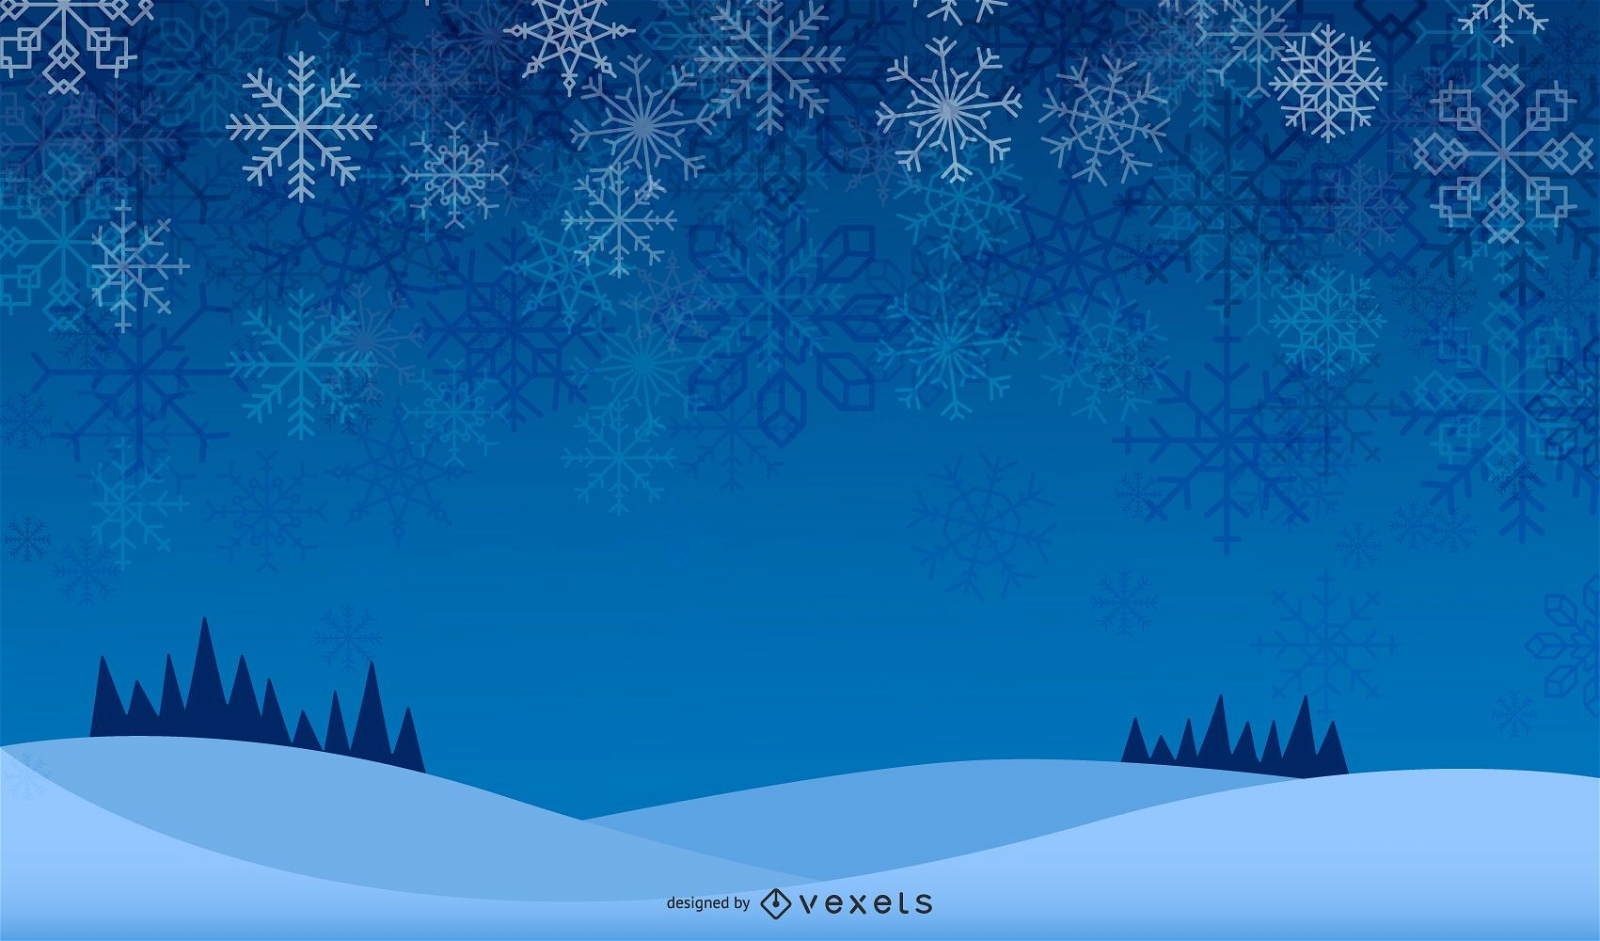 Glowing Snowflakes Background Design